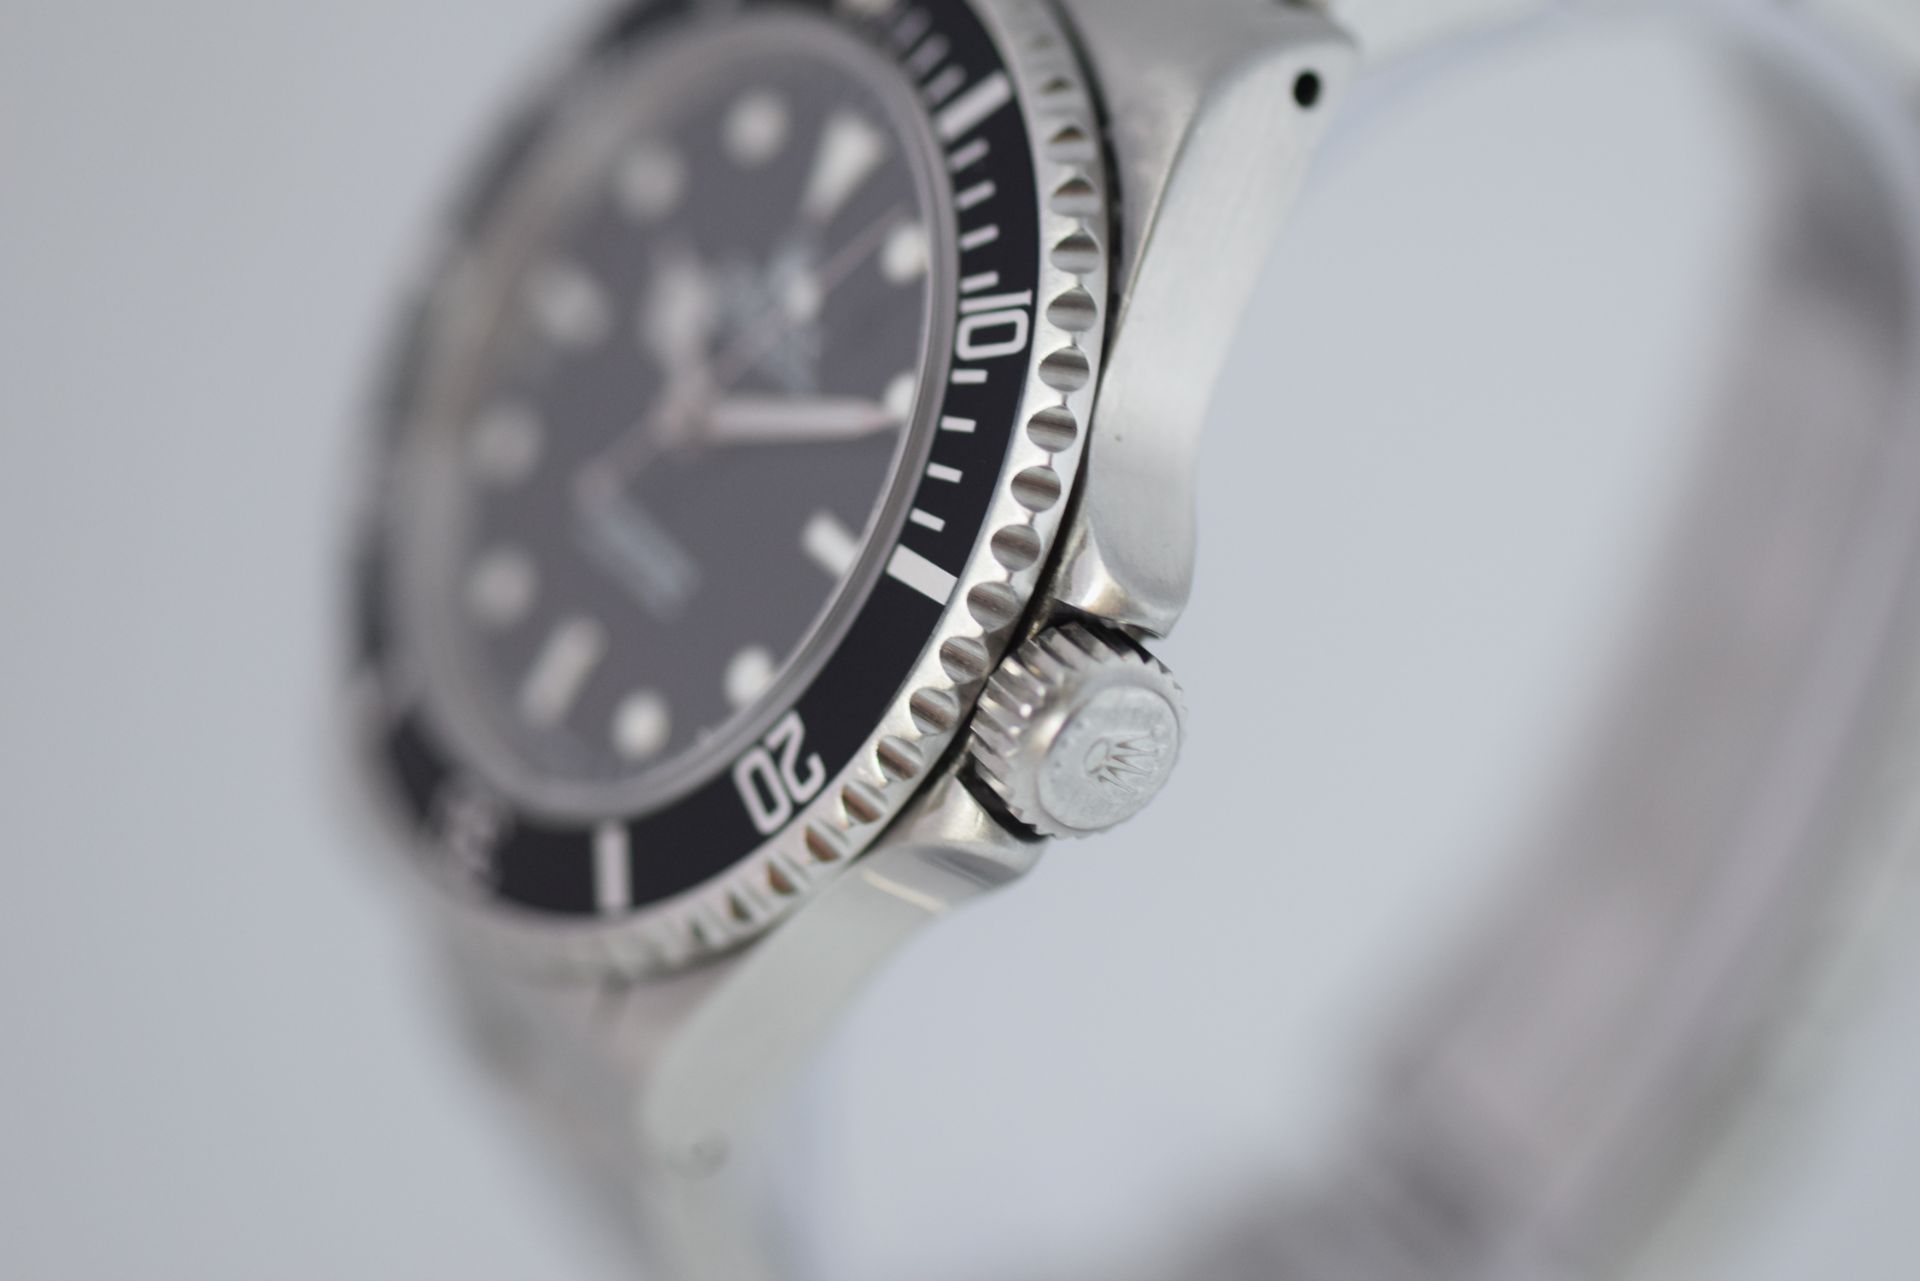 ROLEX 14060M SUBMARINER with ROLEX BOX 1YR WTY - Image 3 of 9